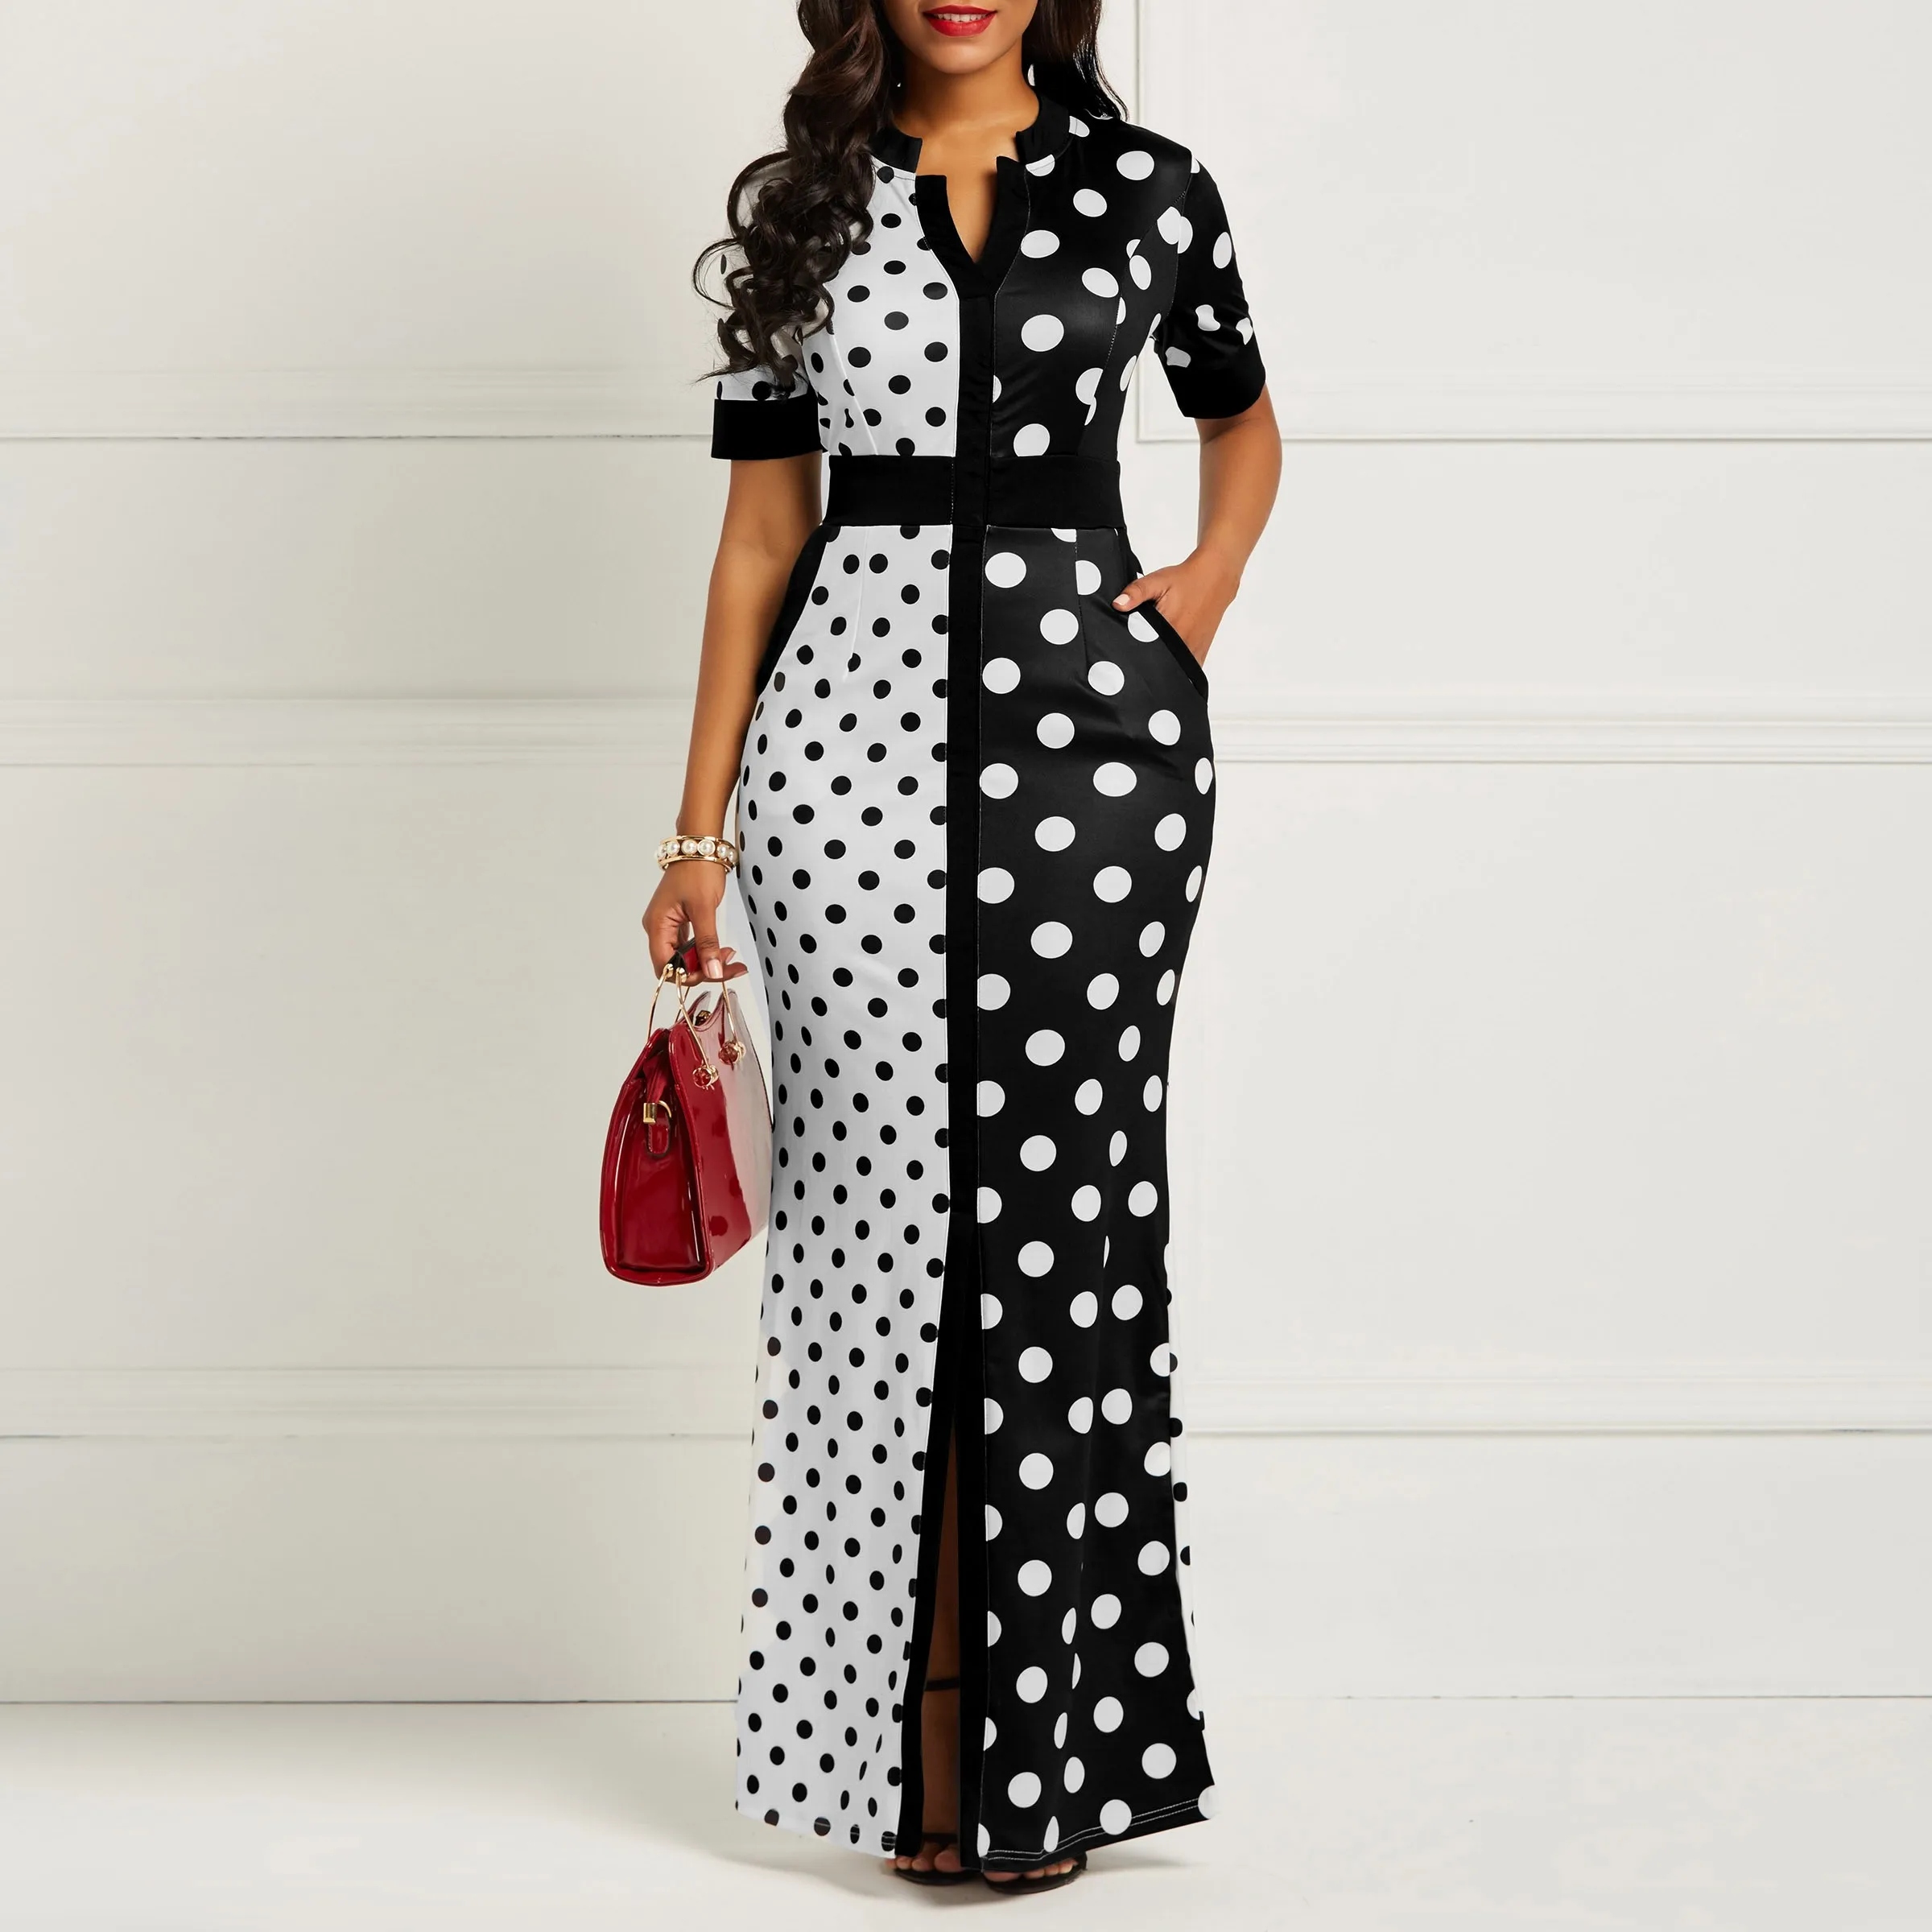 mother of the bride dresses for over 50s